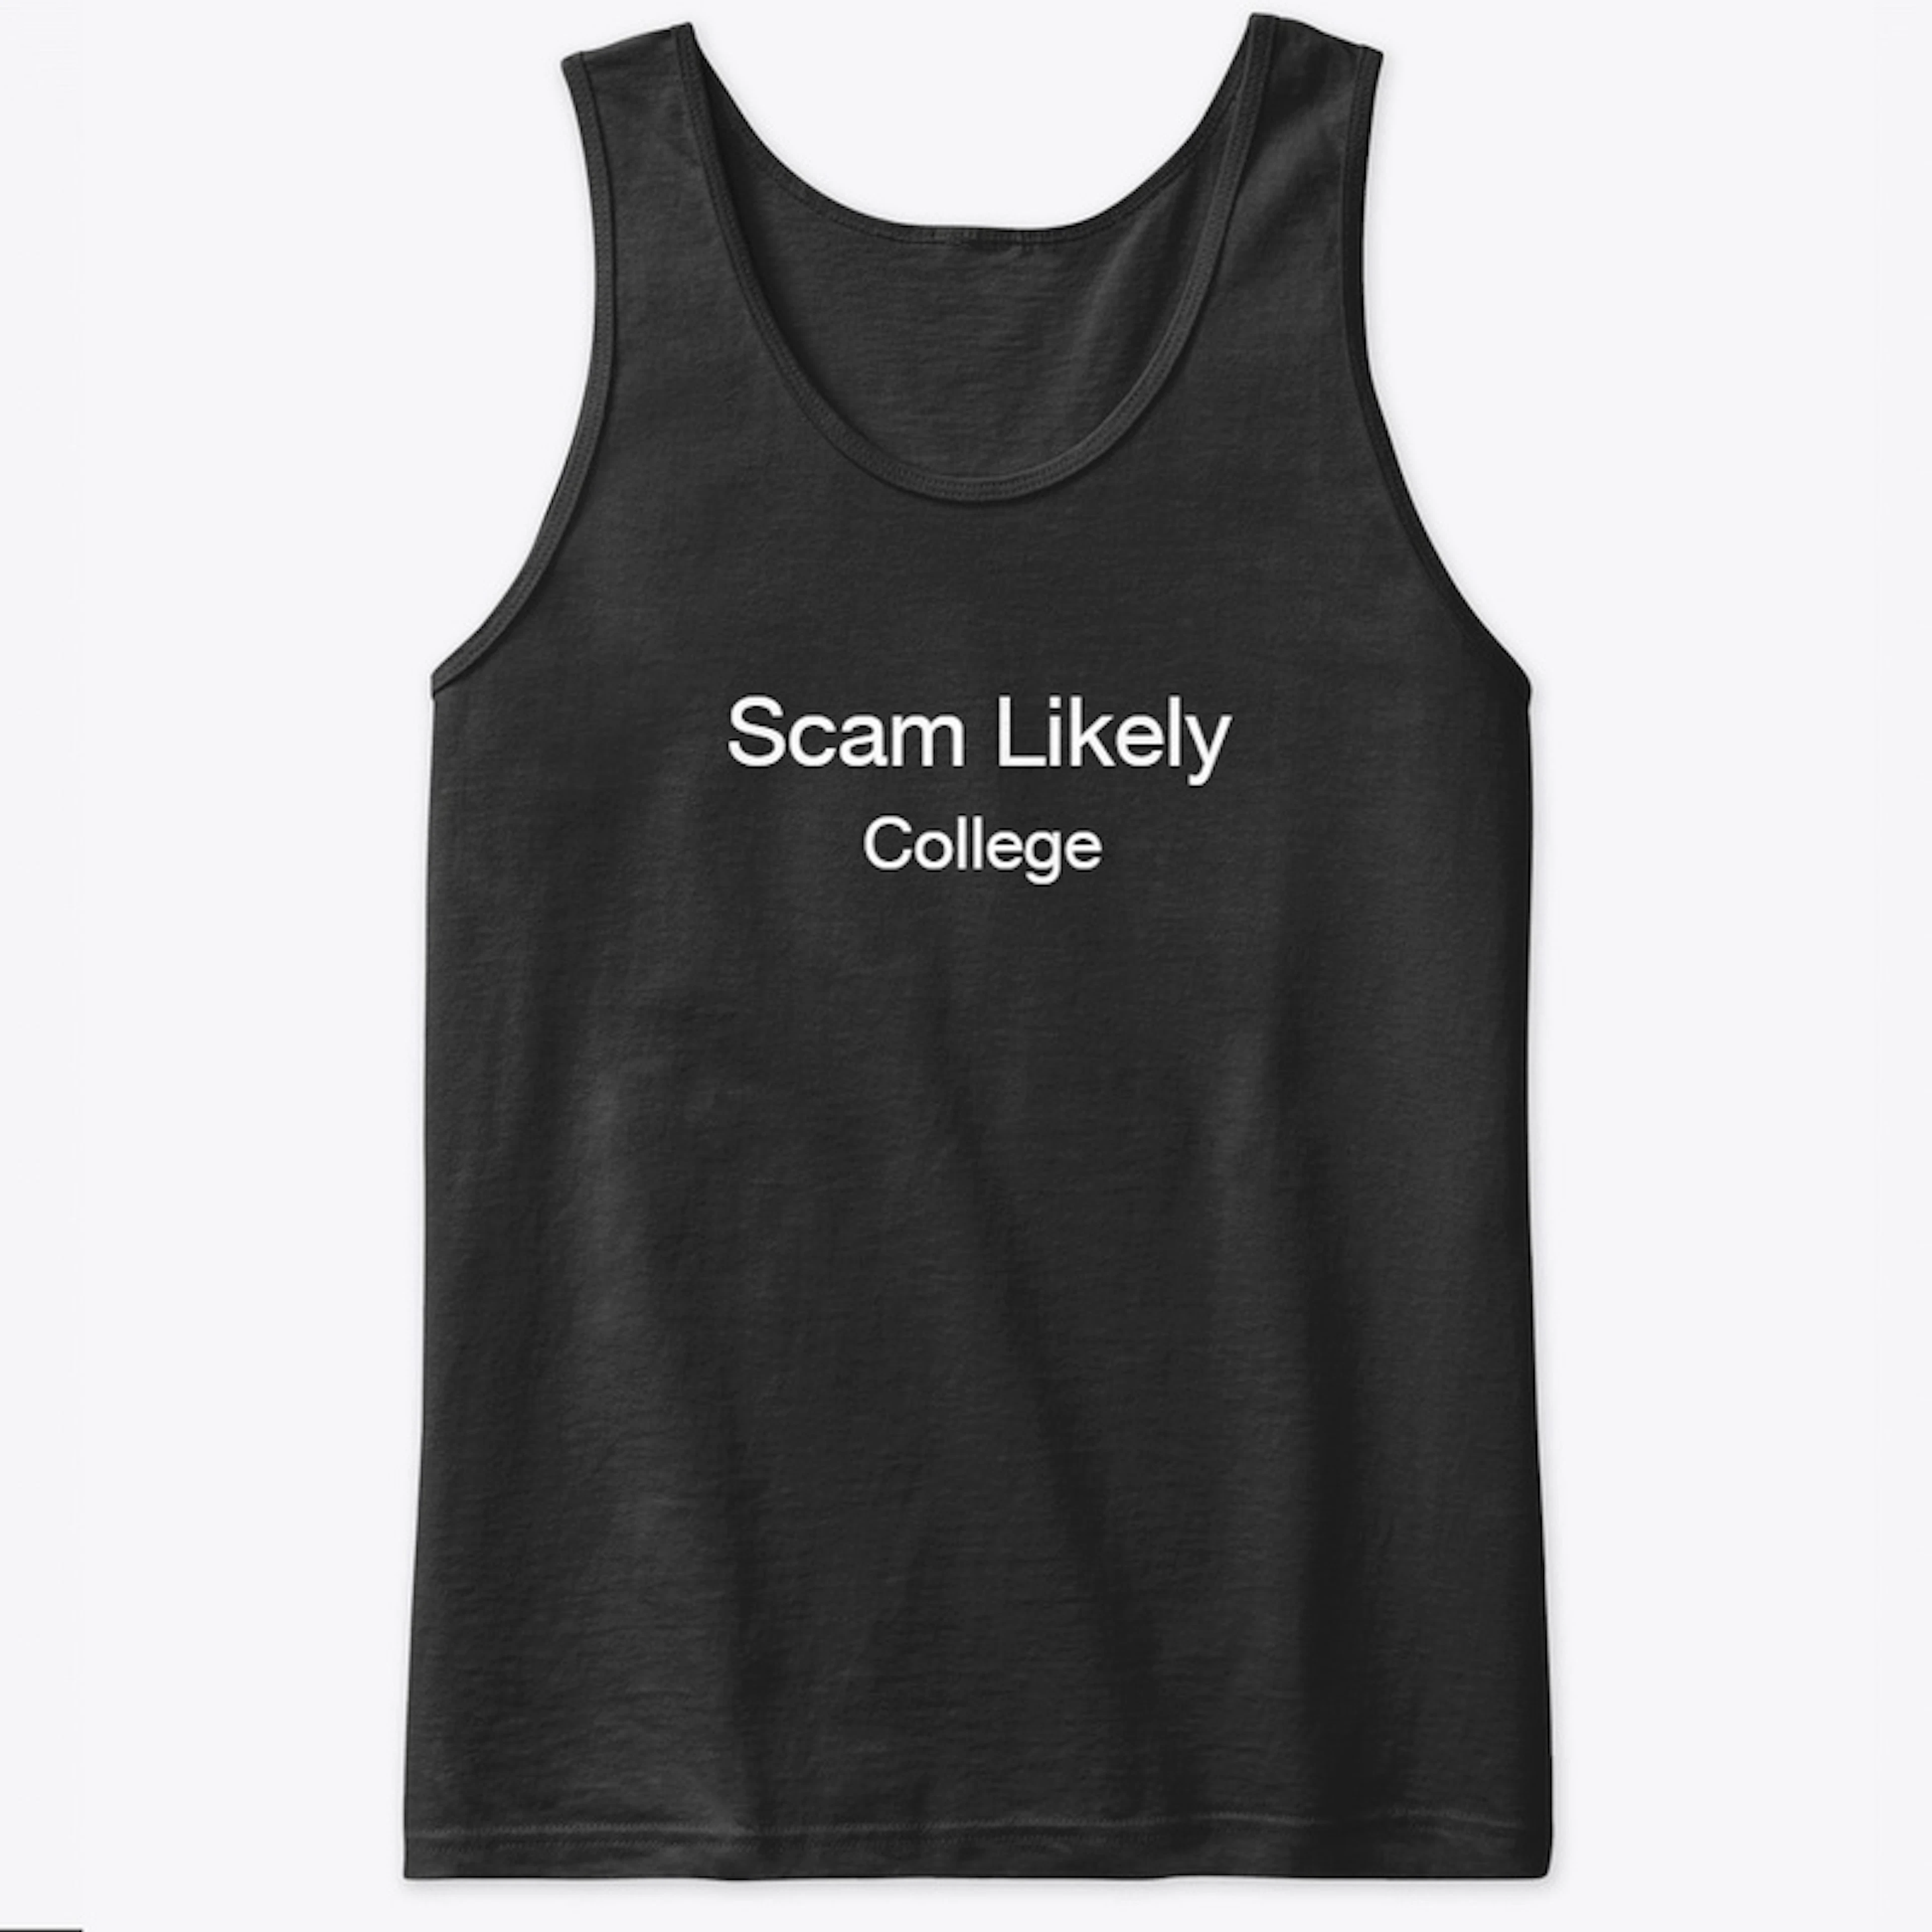 Scam Likely, College